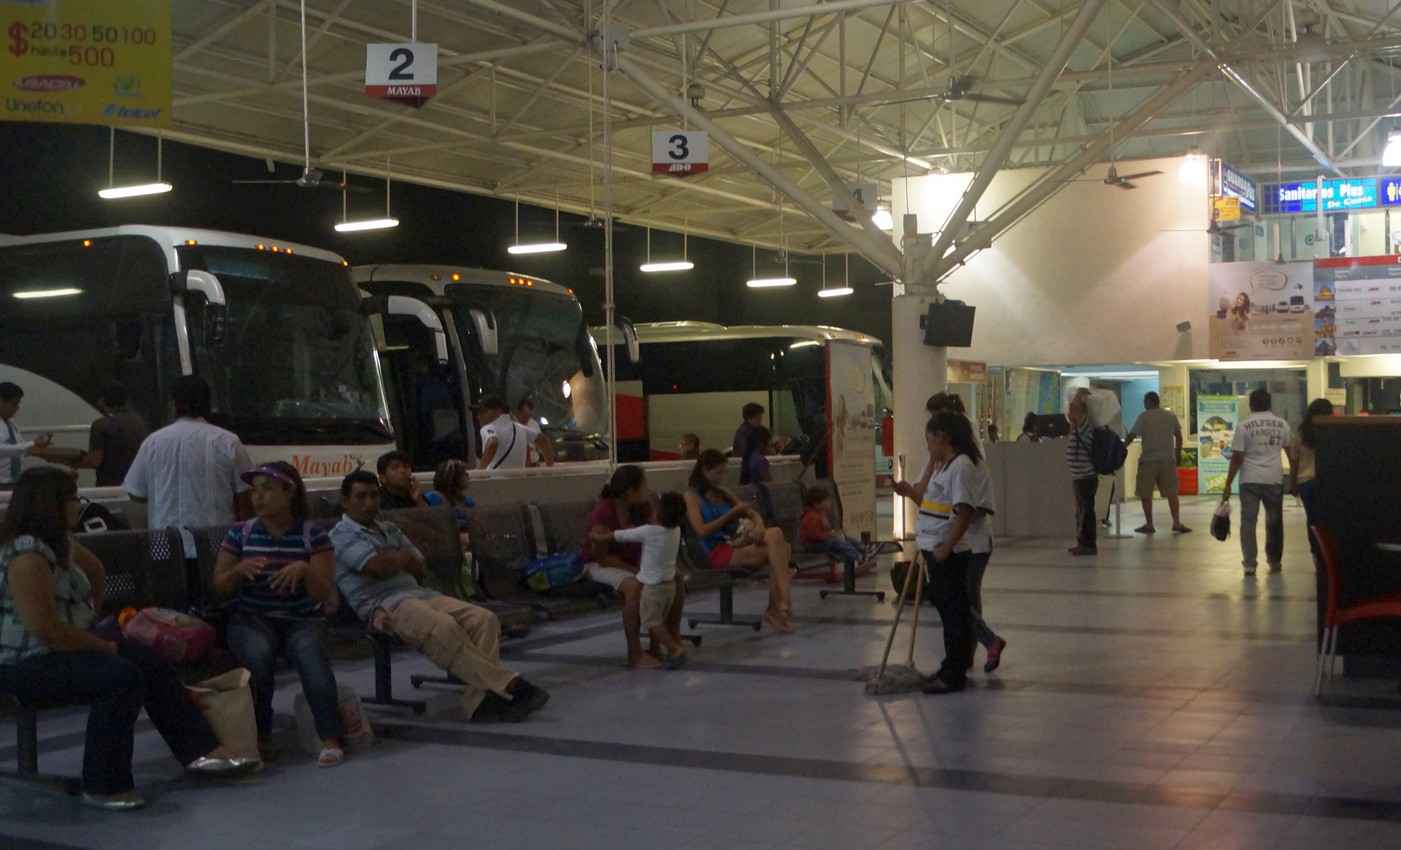 The bus station in Playa Del Carmen with several buses lined up outside.